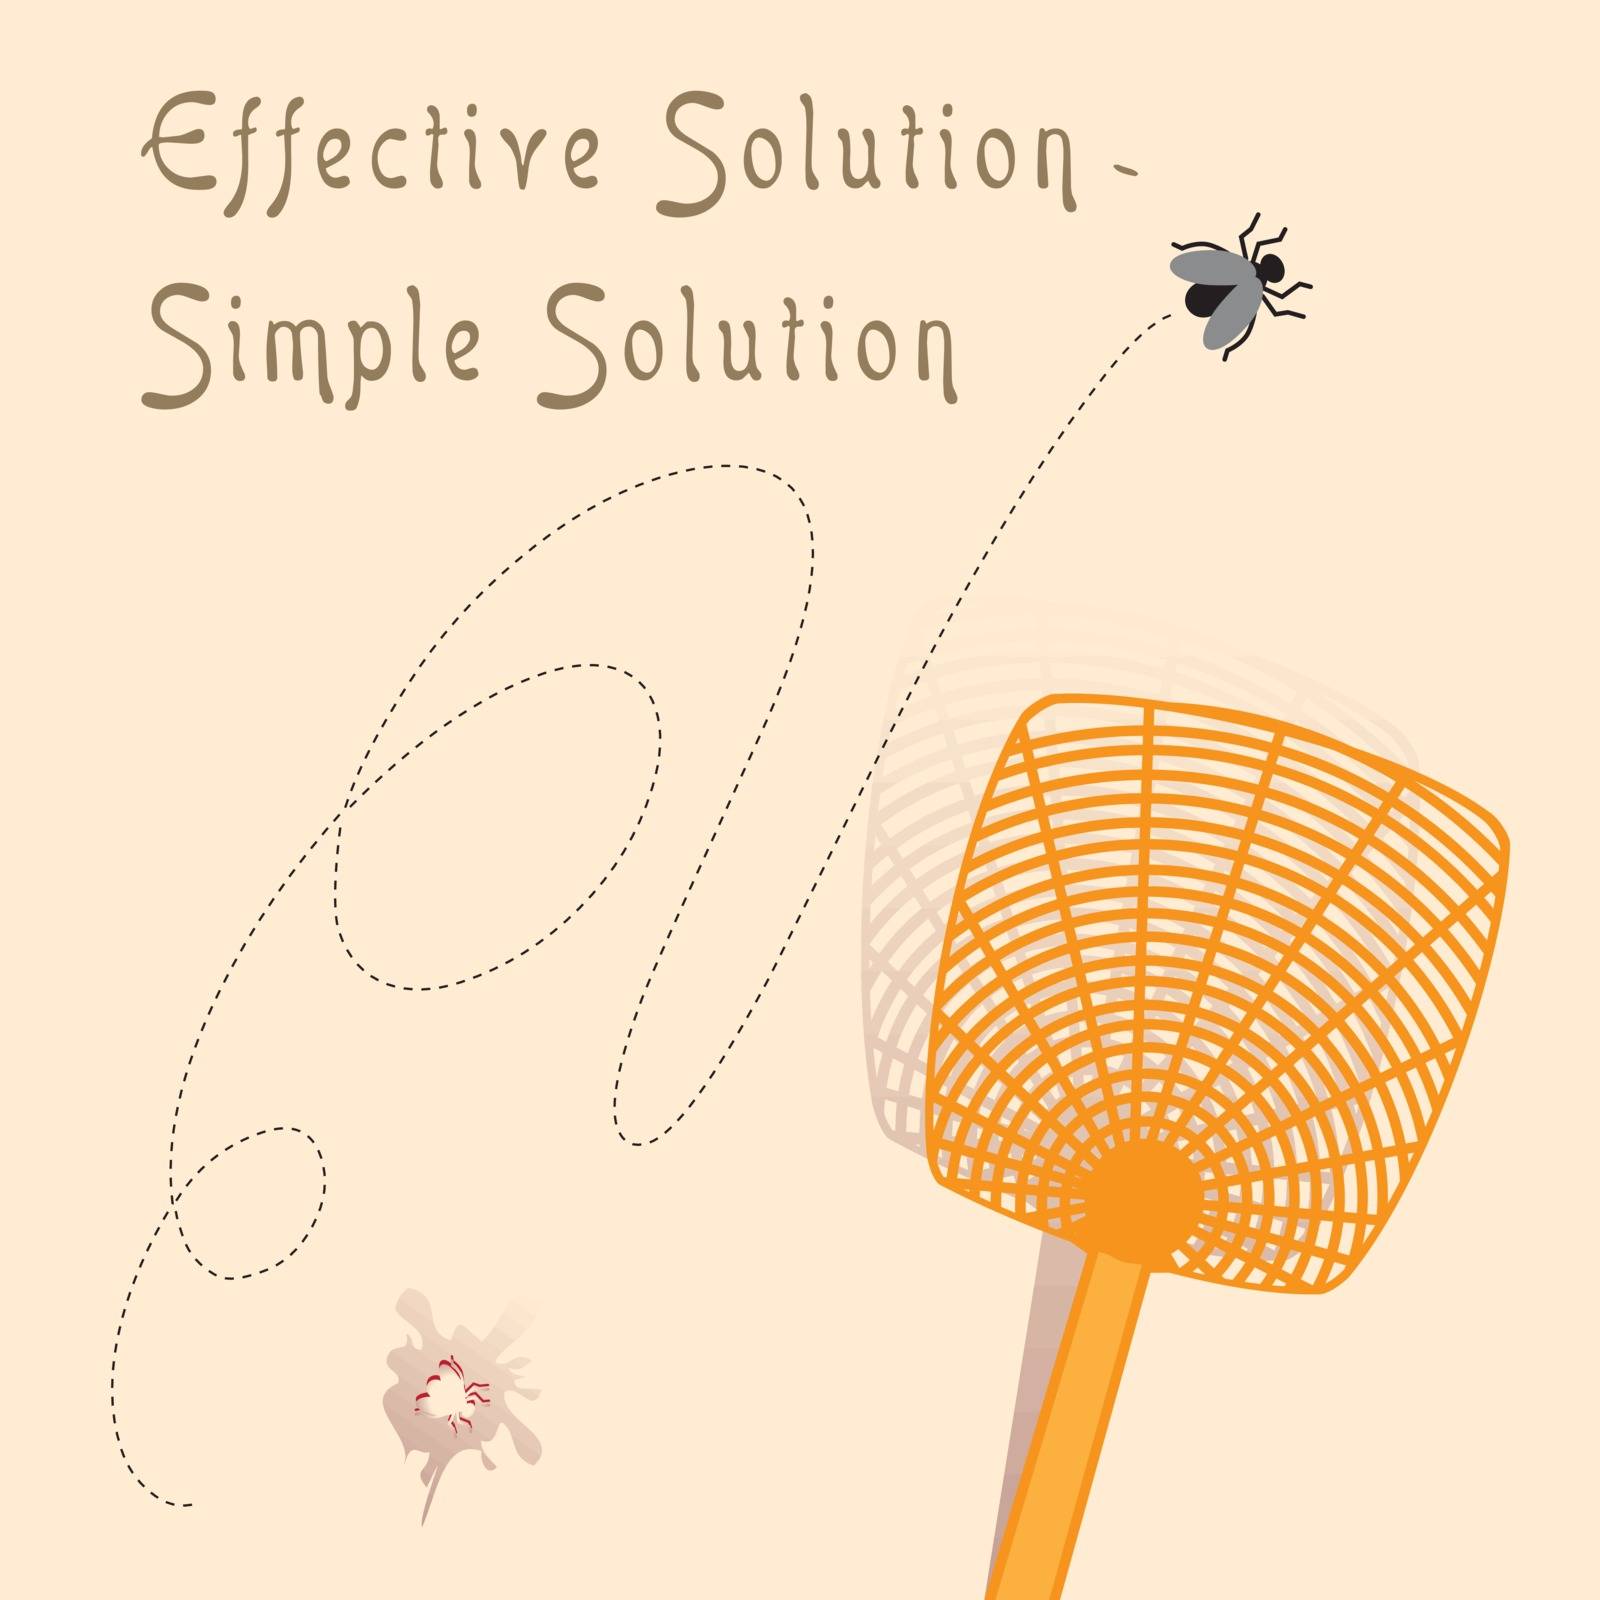 Banner An effective solution is a simple solution, using fly swatter to fight insects.